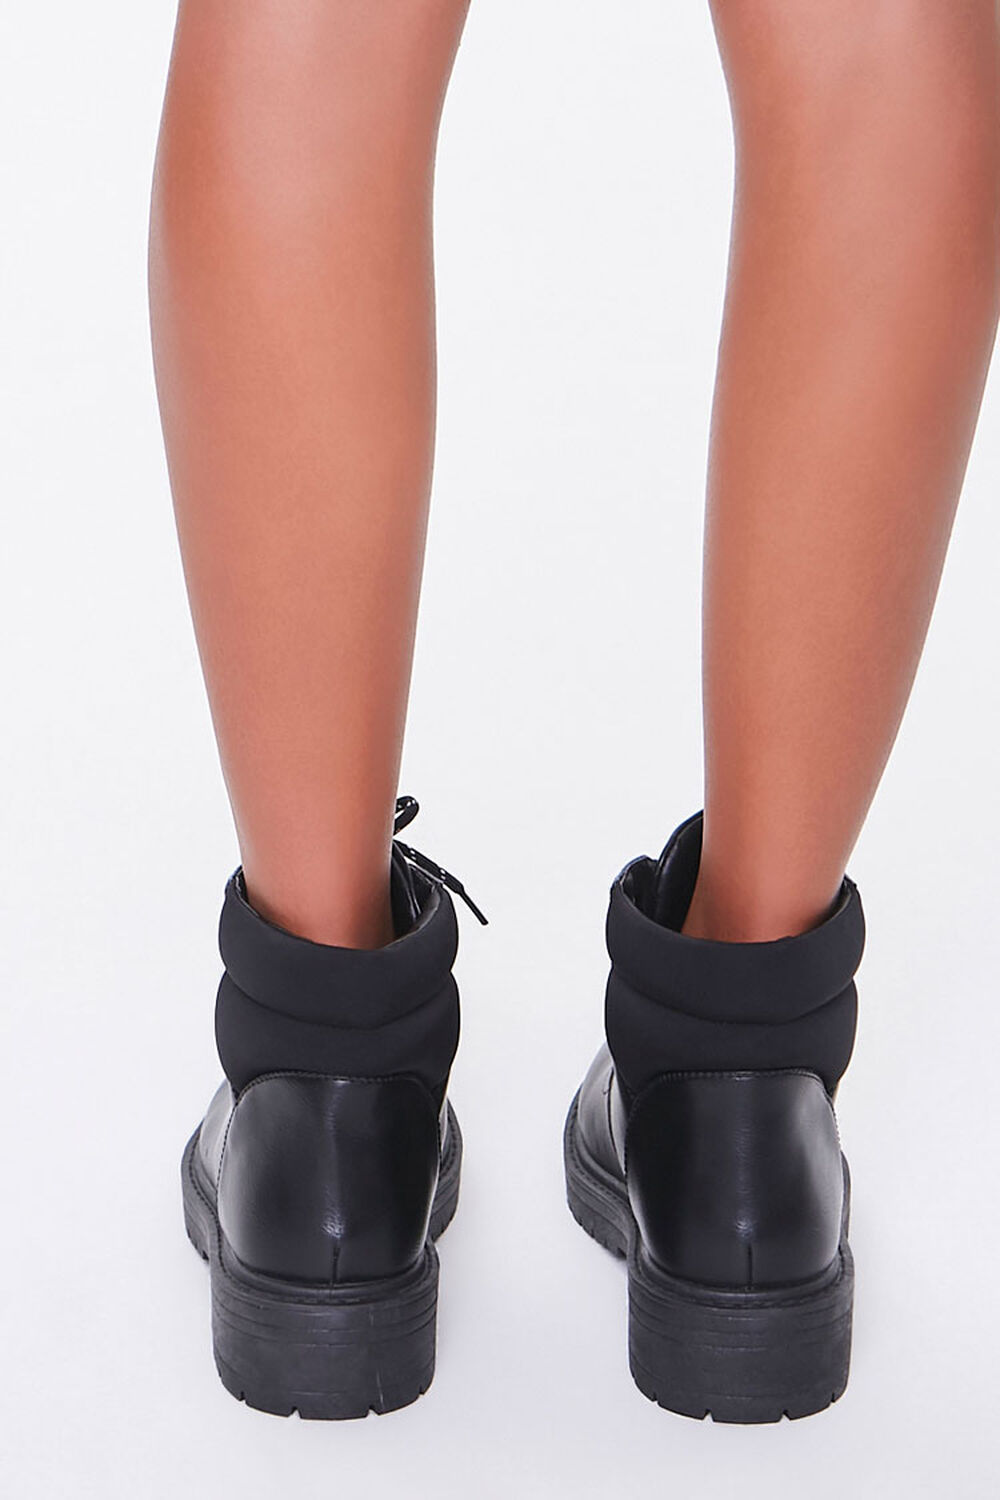 Padded Faux Leather Ankle Boots, image 3